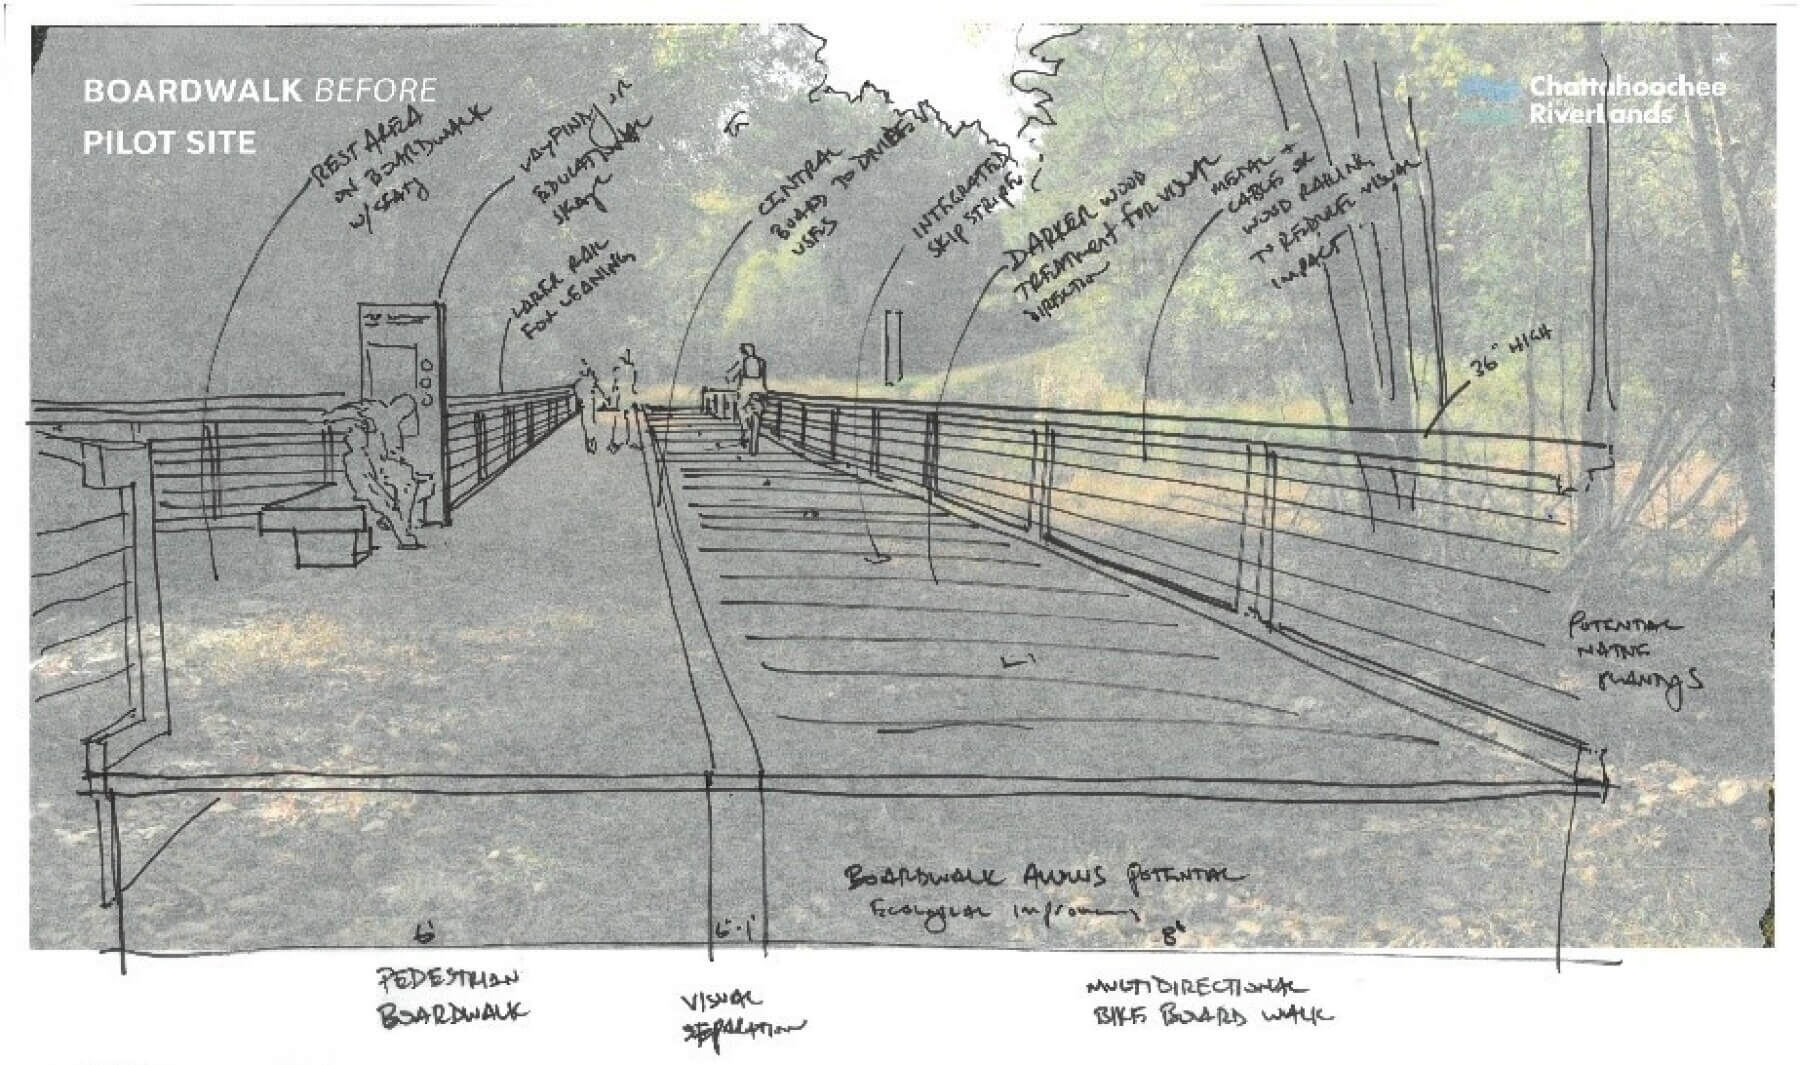 a drawing of proposed boardwalk improvements